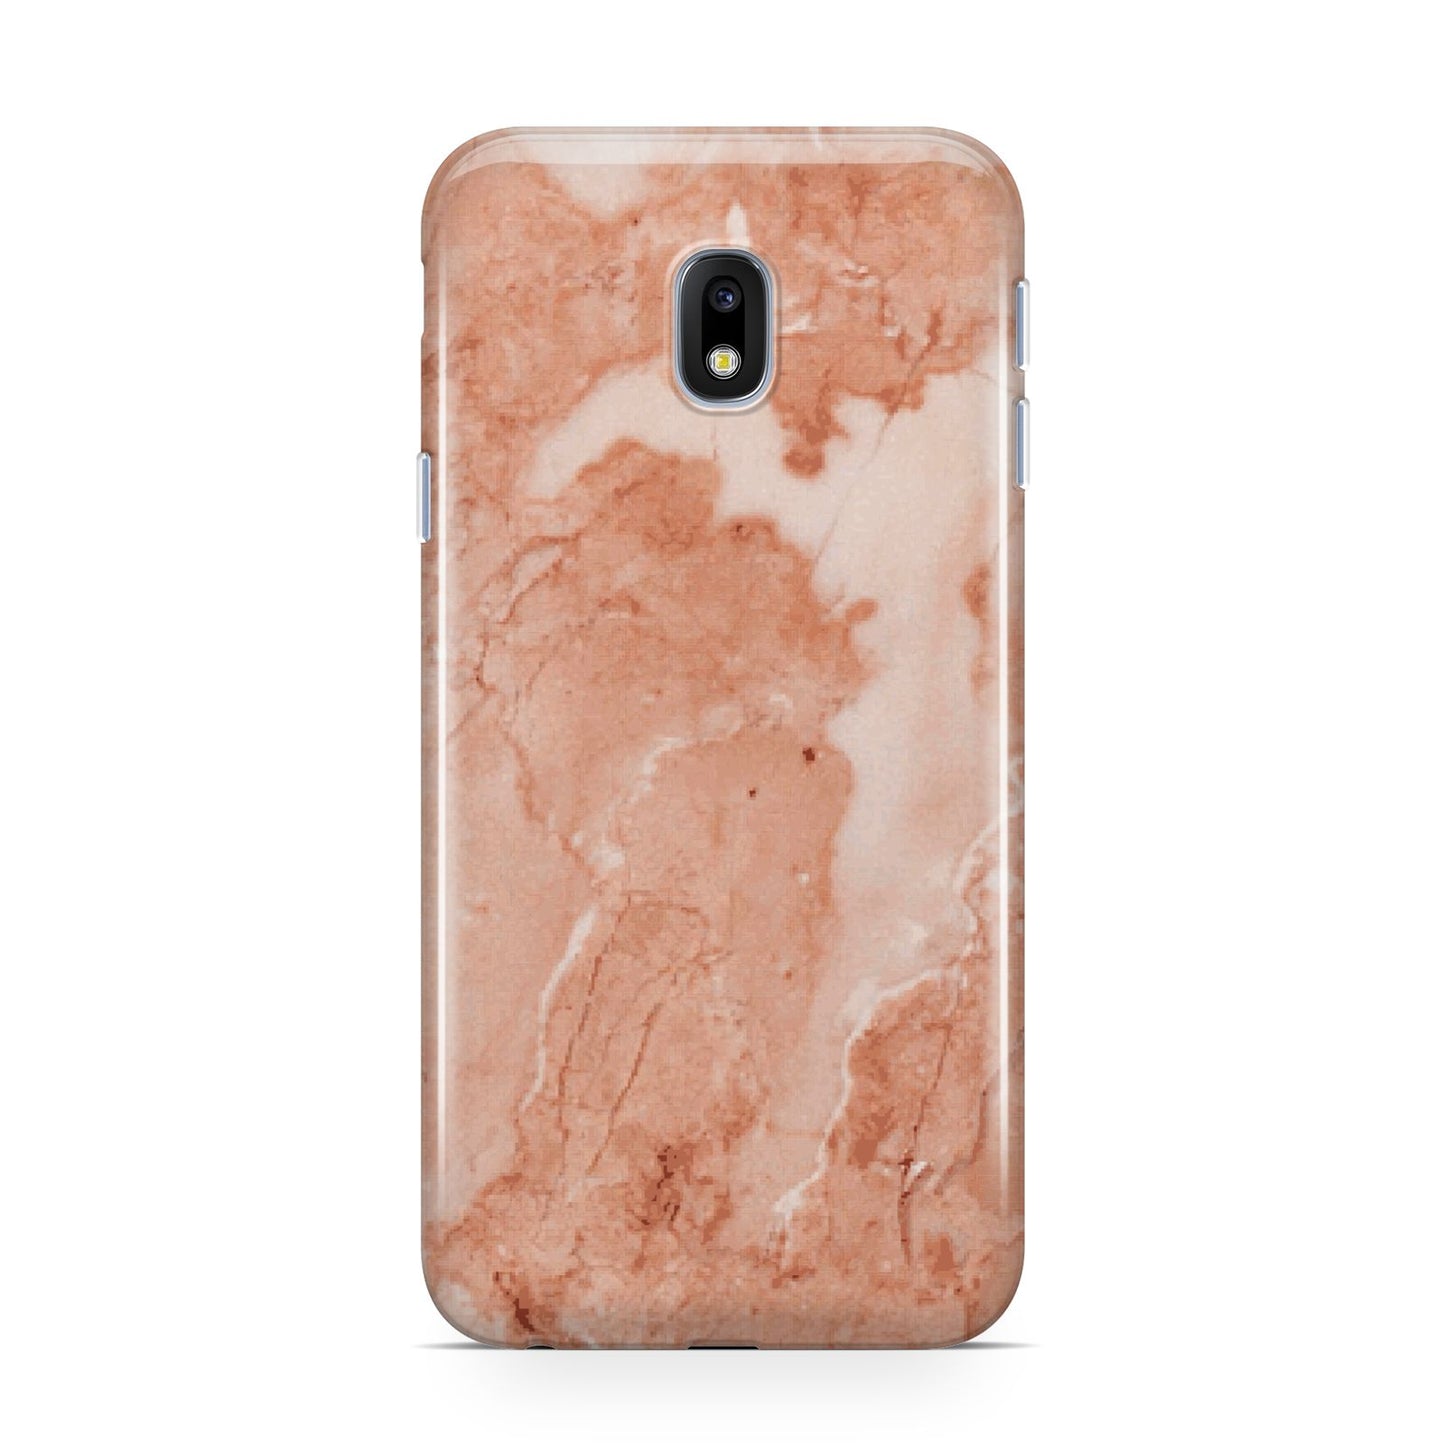 Faux Marble Red Samsung Galaxy J3 2017 Case